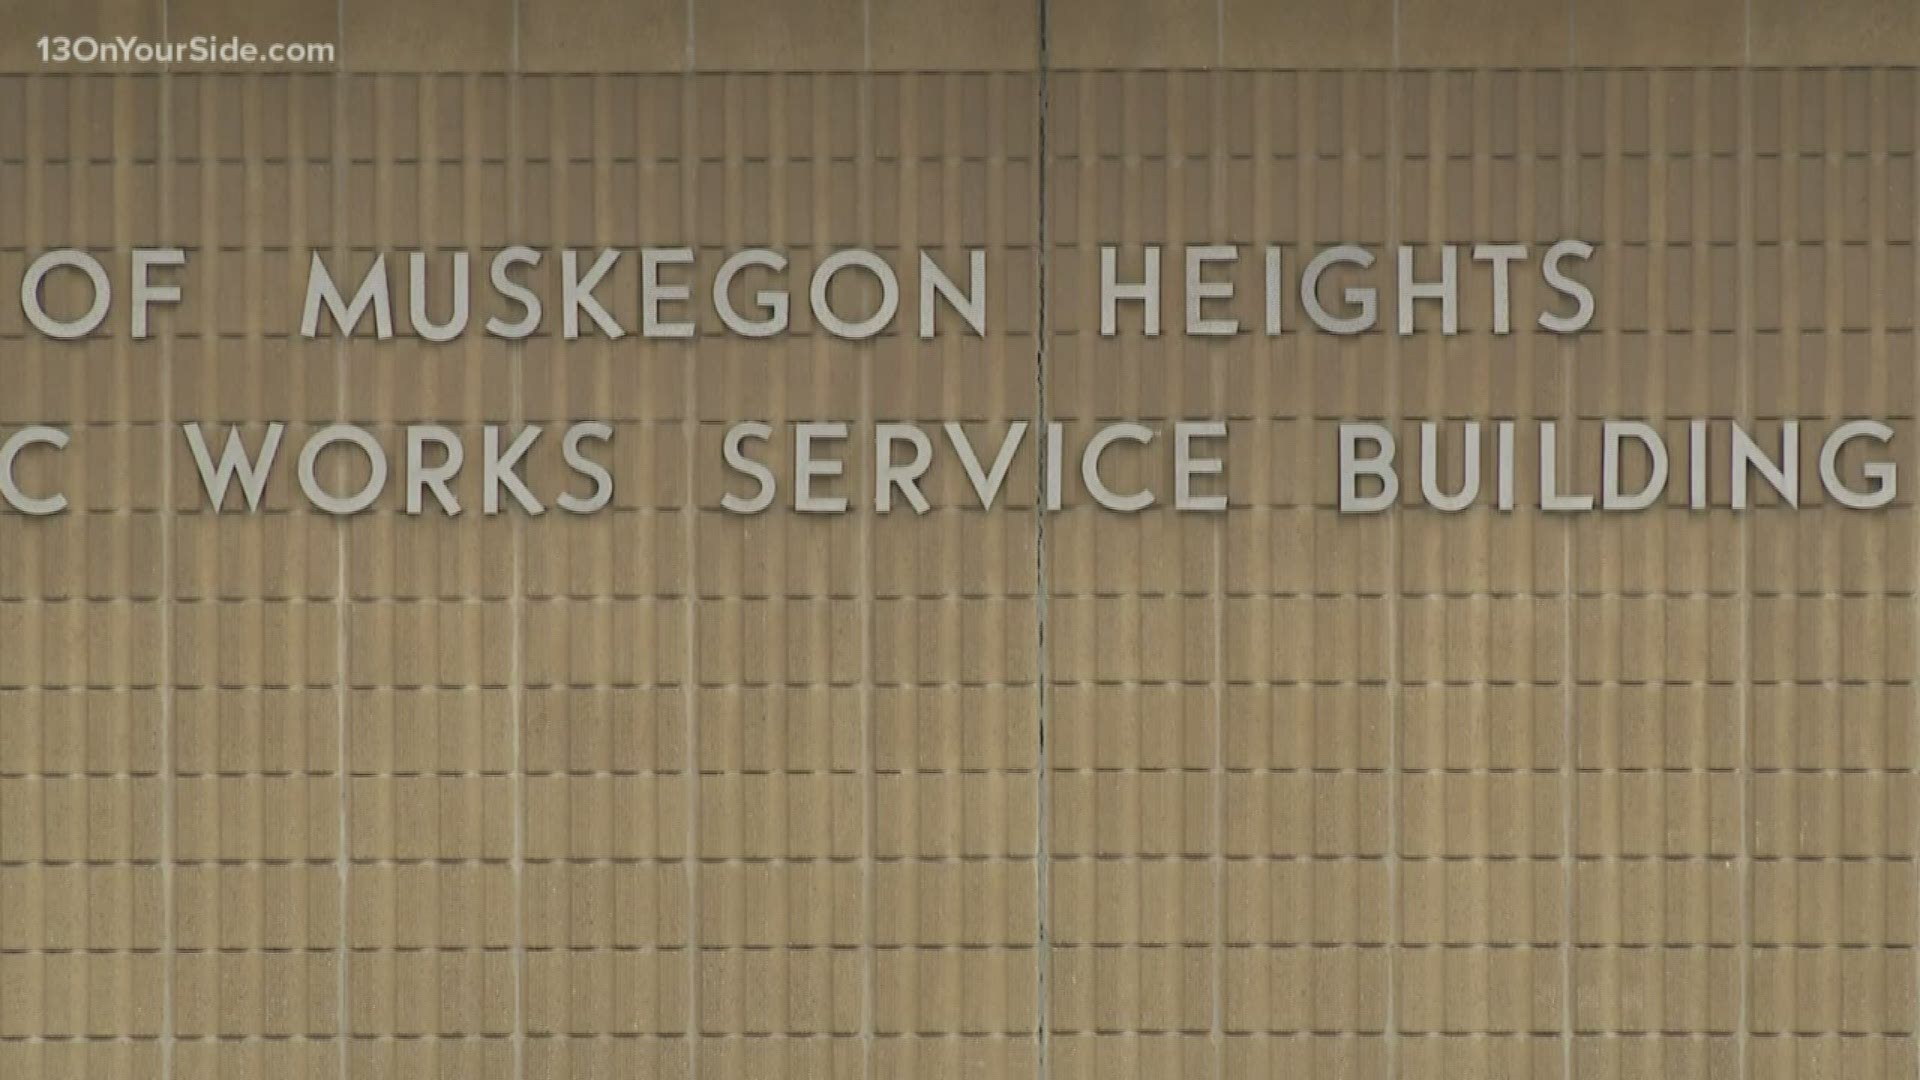 Chart House Energy of Muskegon and New Energy Equity are partnering with the City of Muskegon Heights to develop 5 solar projects in the city.